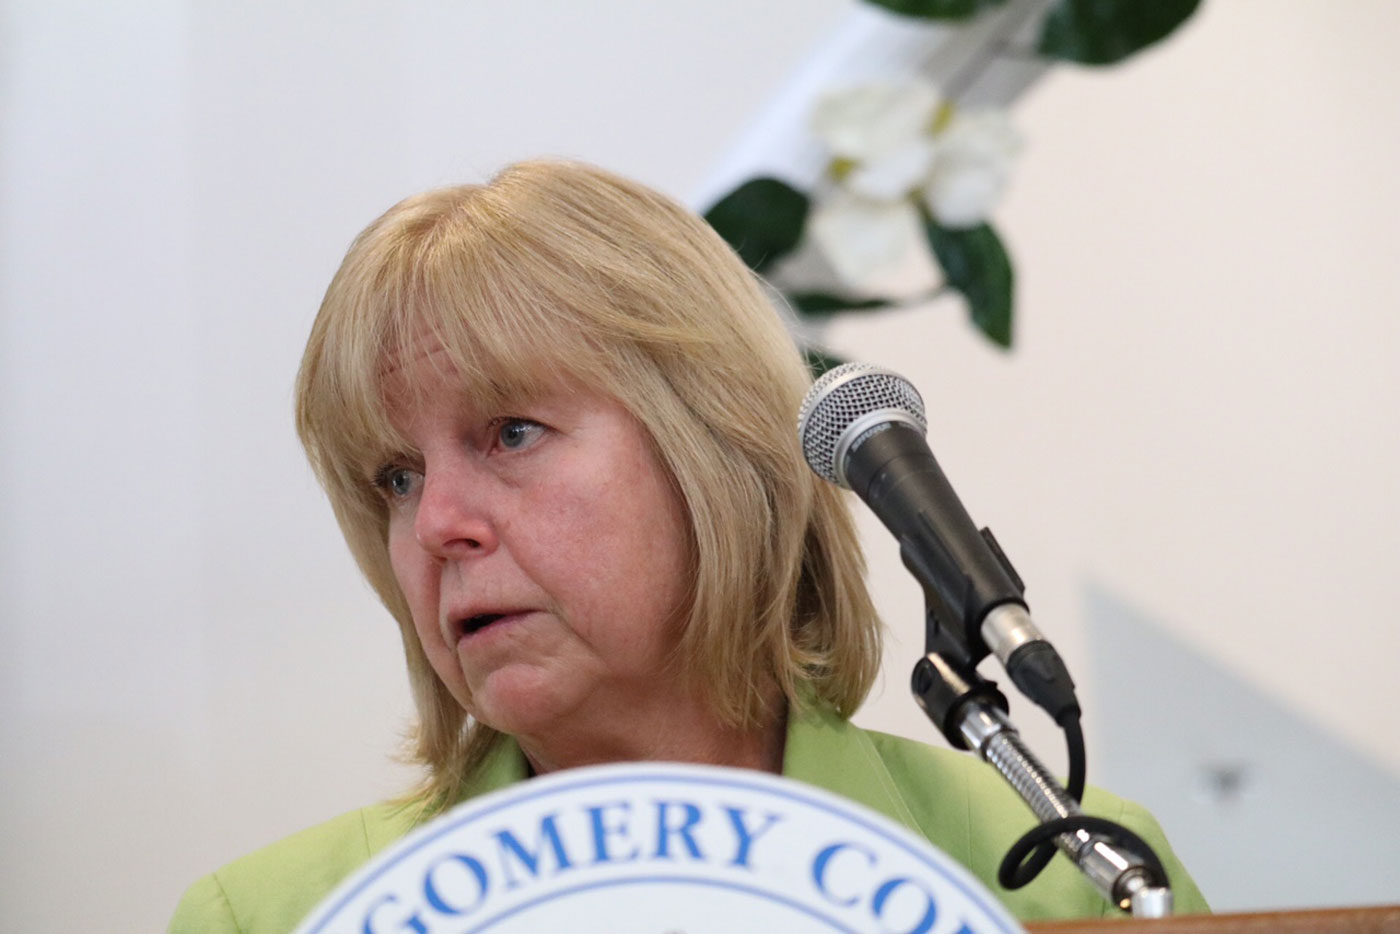 Montgomery County Council member Nancy Floreen aims to run for county executive as a third-party candidate. (WTOP/Kate Ryan, file)